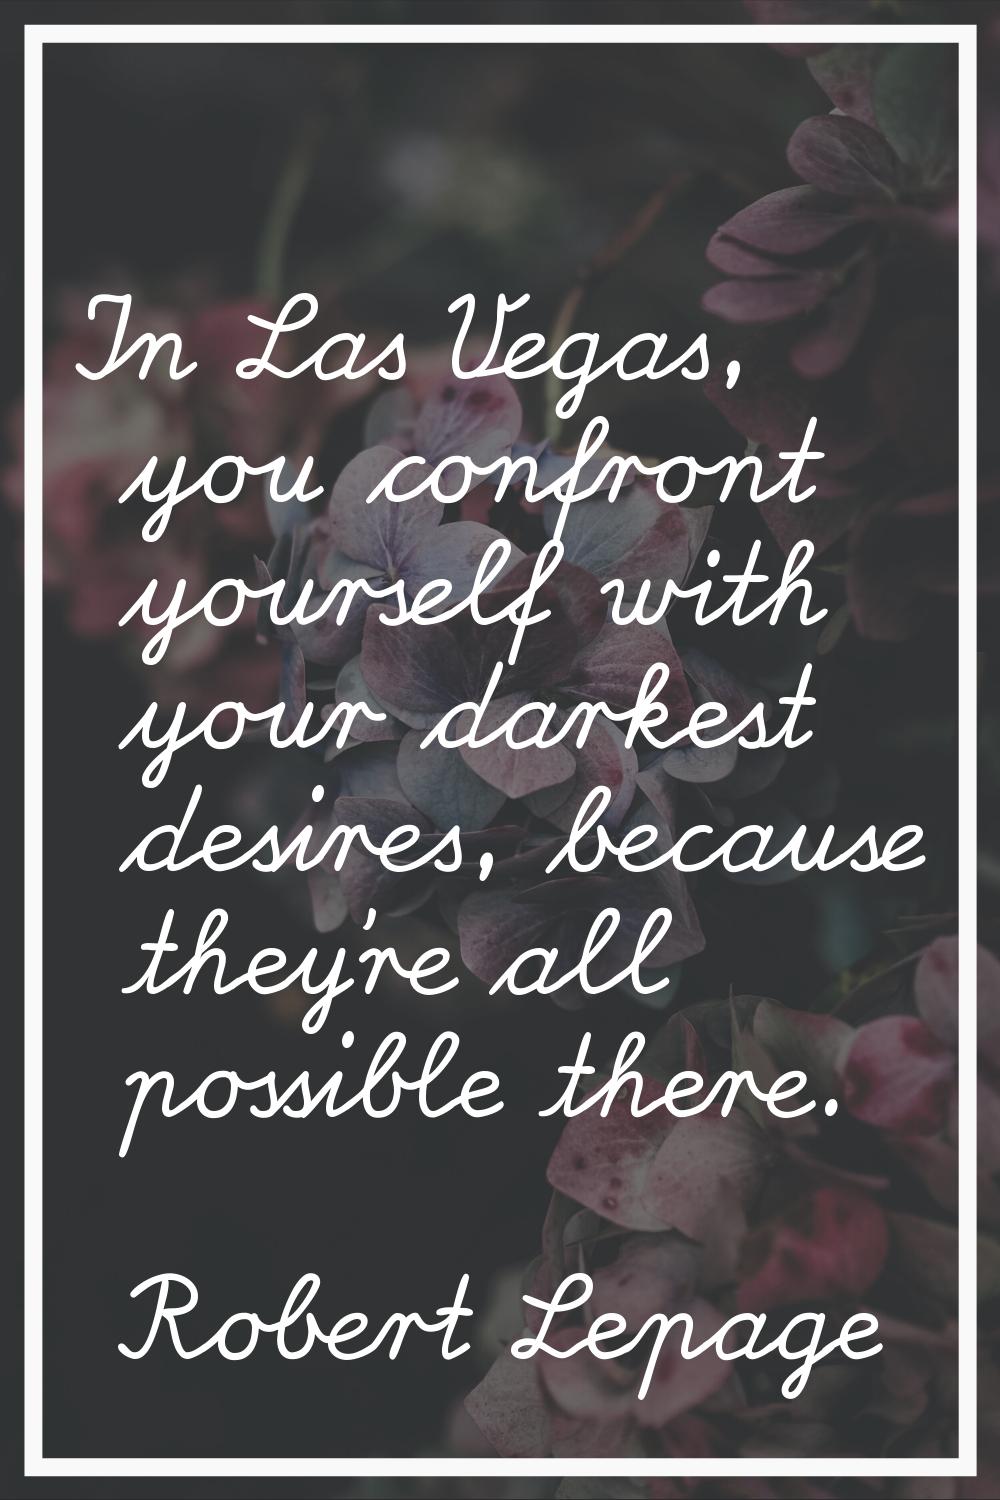 In Las Vegas, you confront yourself with your darkest desires, because they're all possible there.